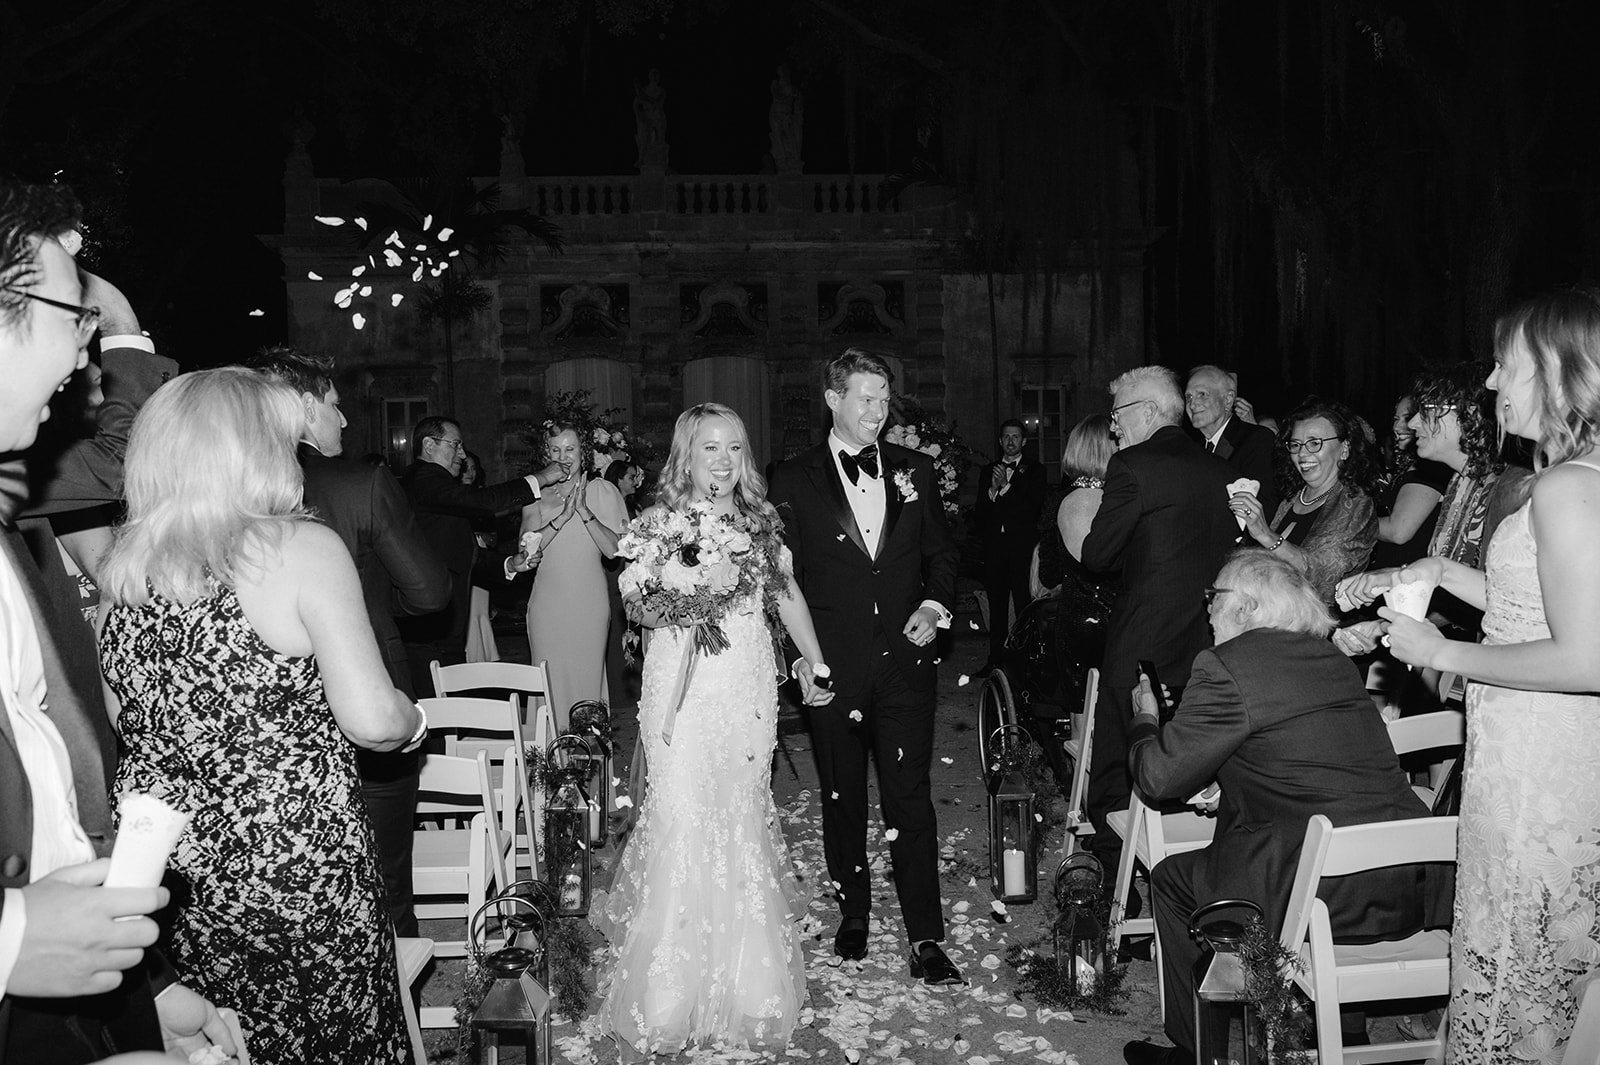 Bride and groom recessional and flower petal toss.